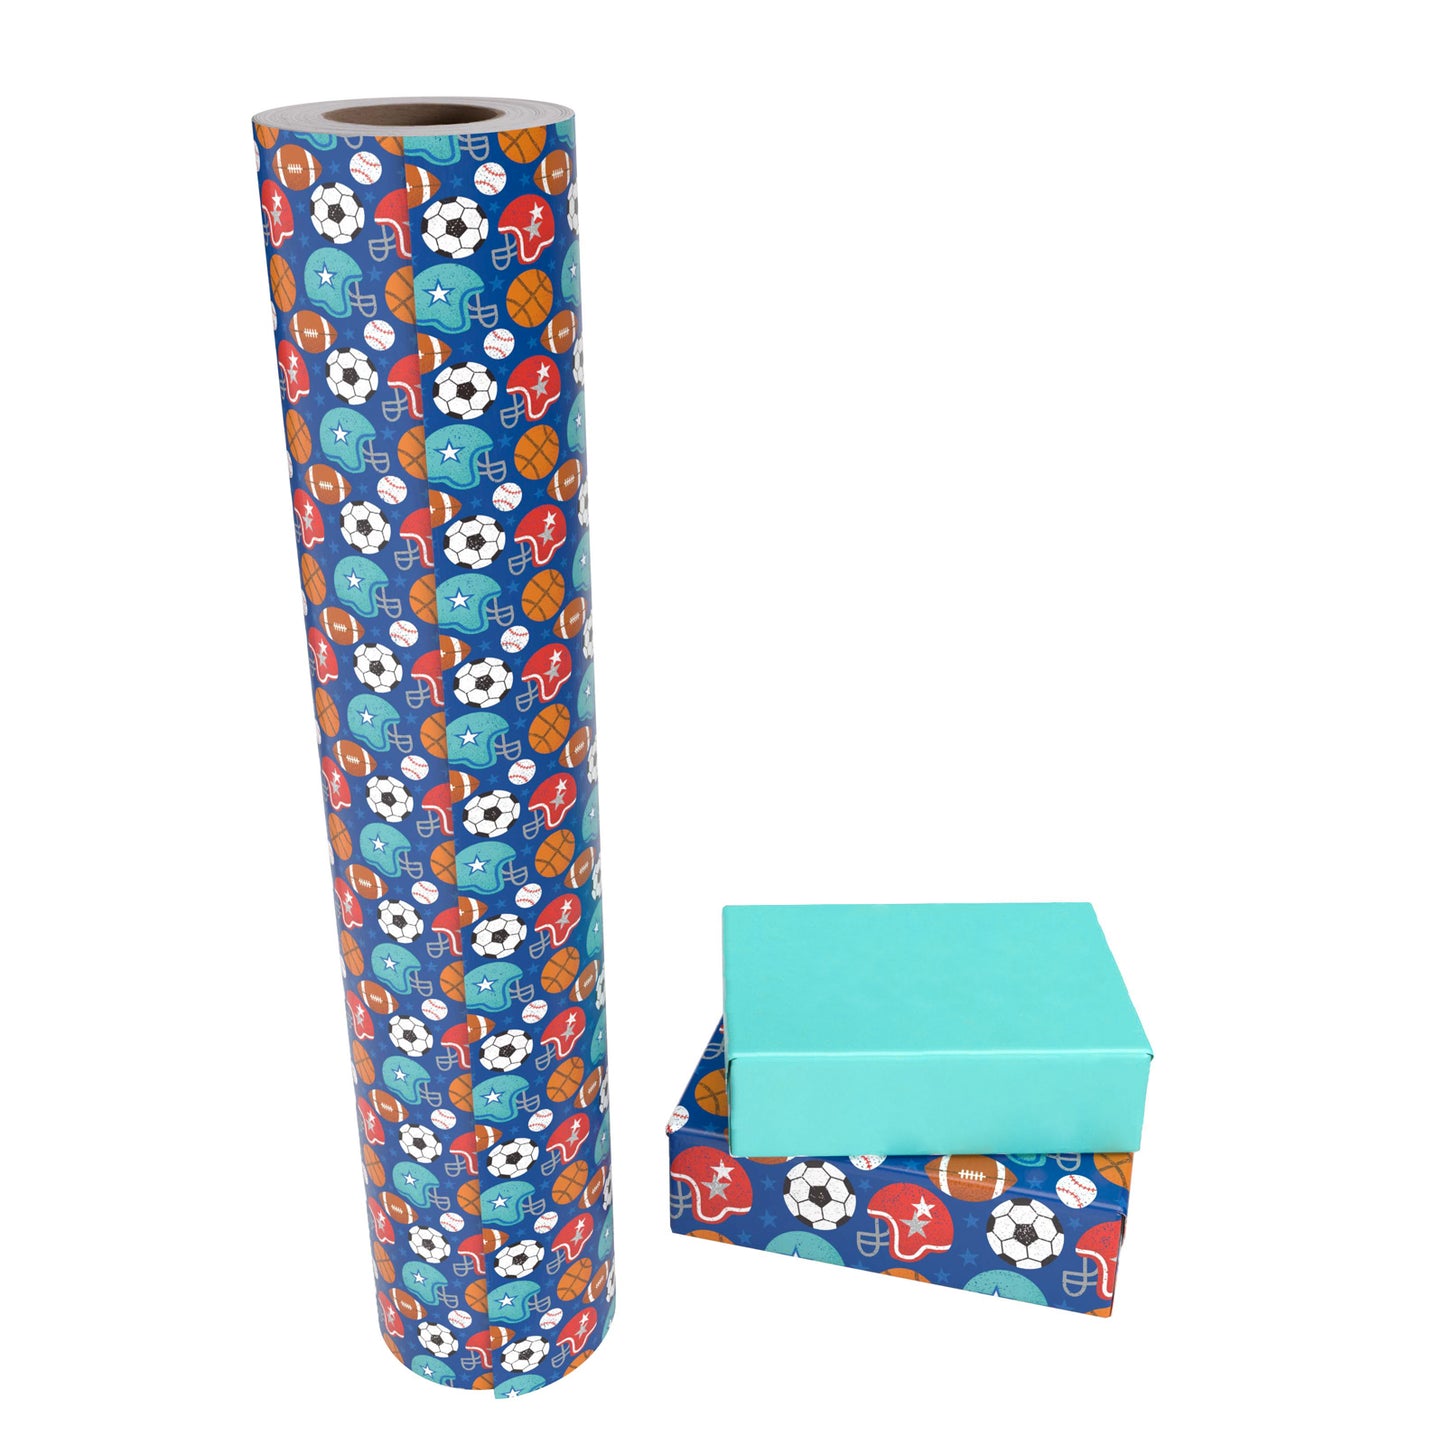 Football Sports Boy's Birthday Wrapping Paper with Teal Color Packing Paper Supply Wrapaholic